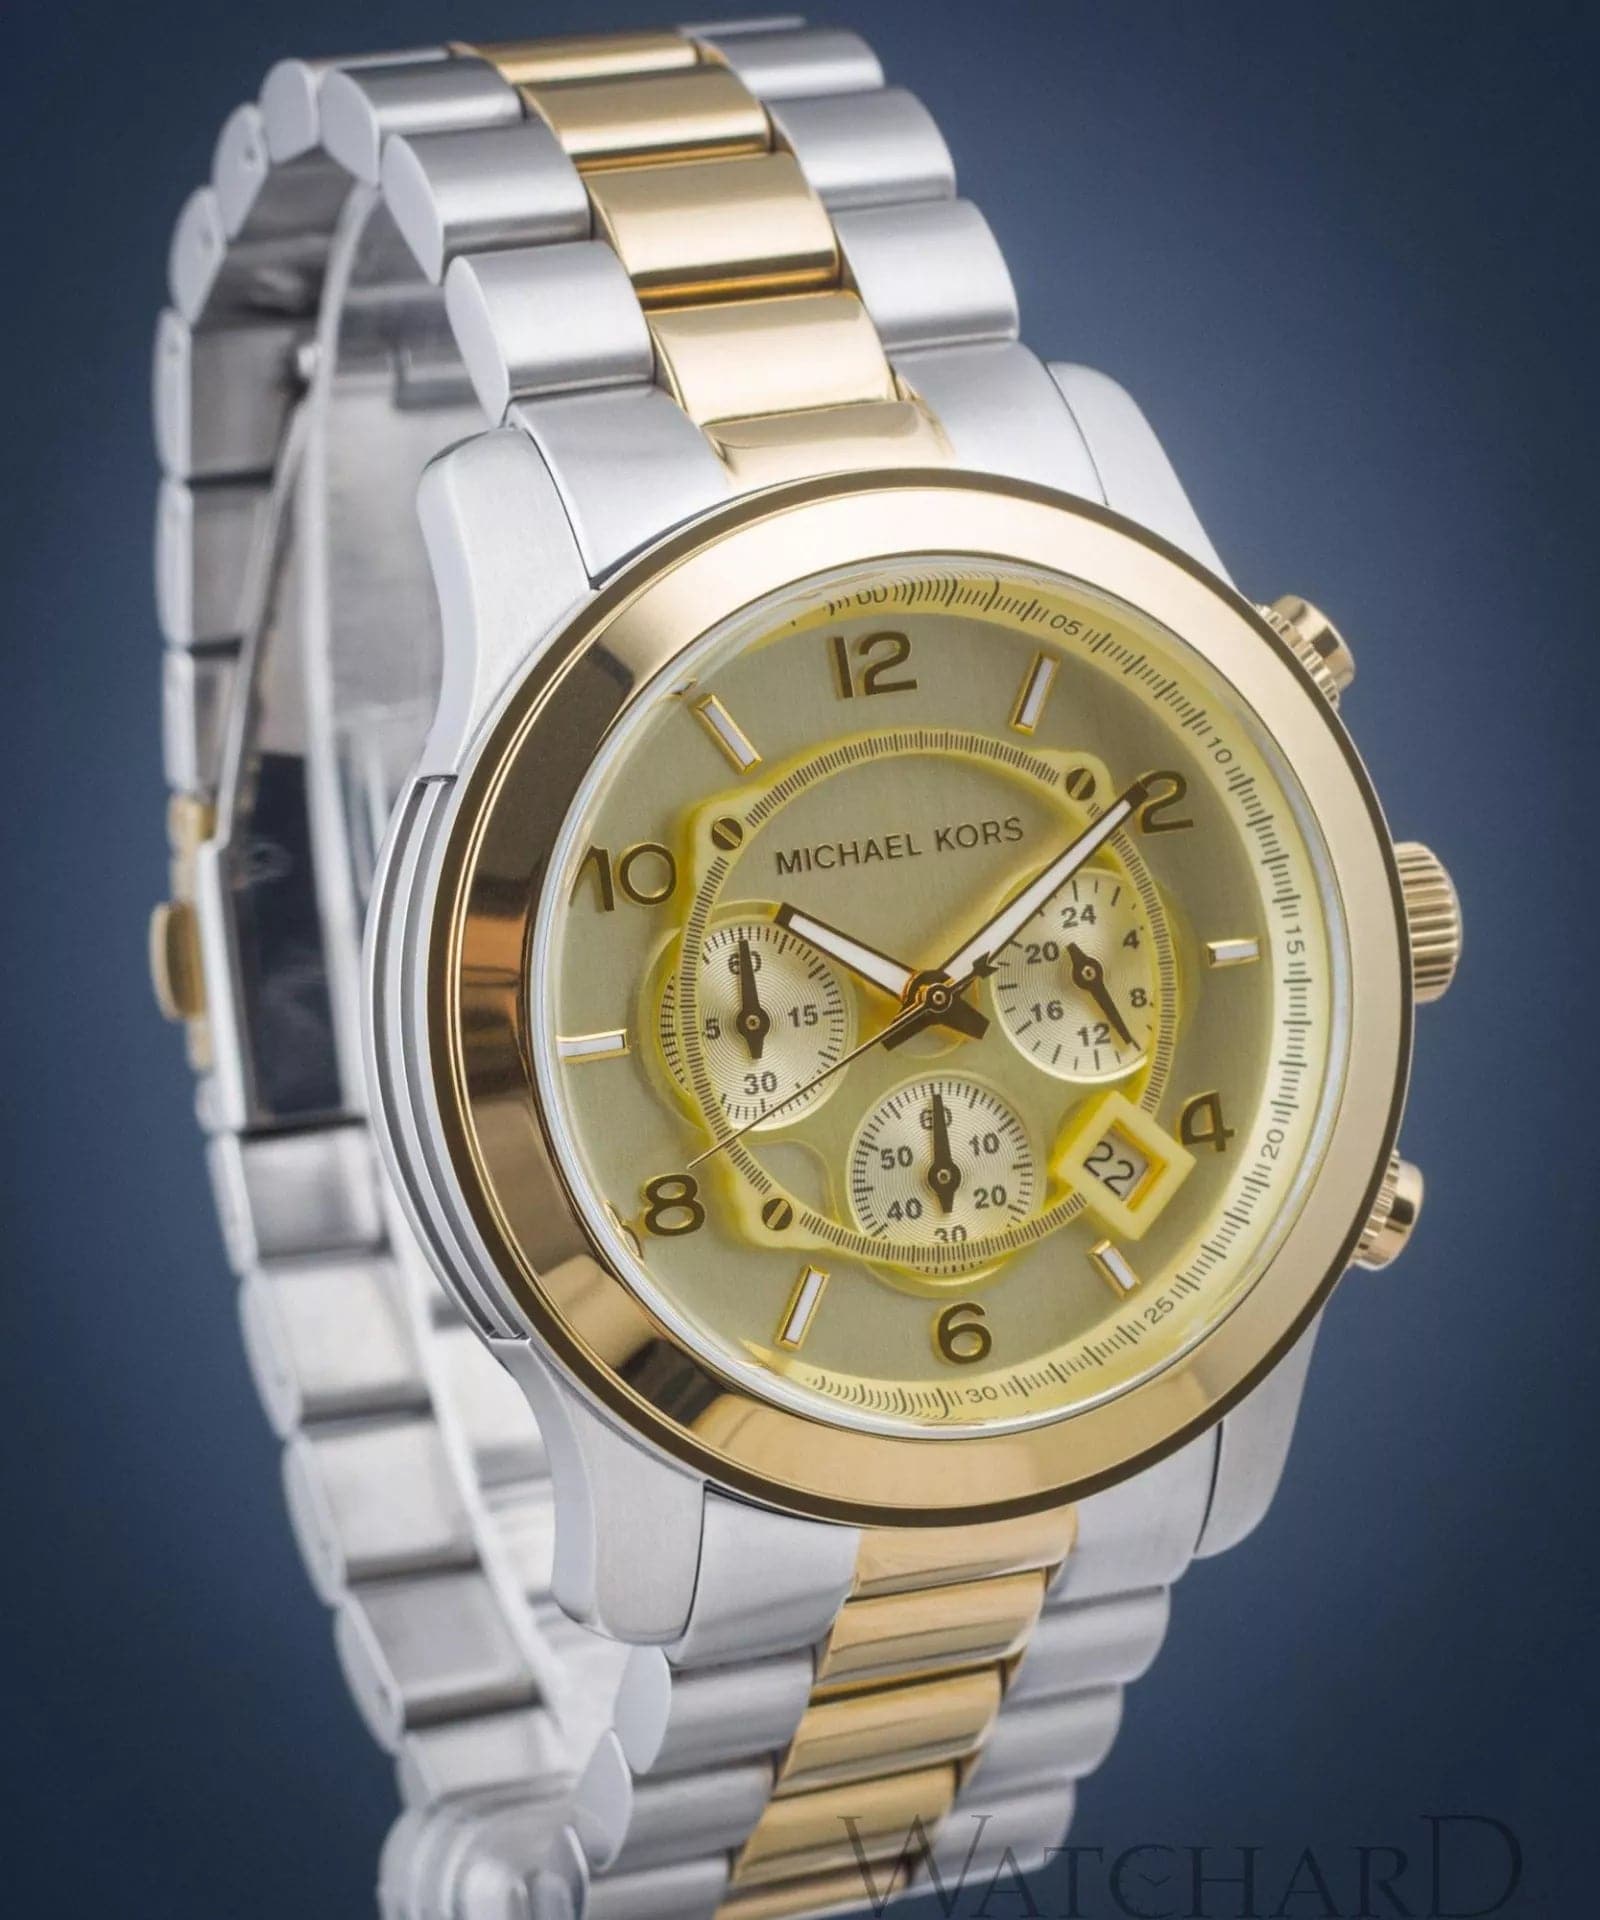 Michael Kors Runway 45 mm Gold Dial Stainless Steel Chronograph Watch